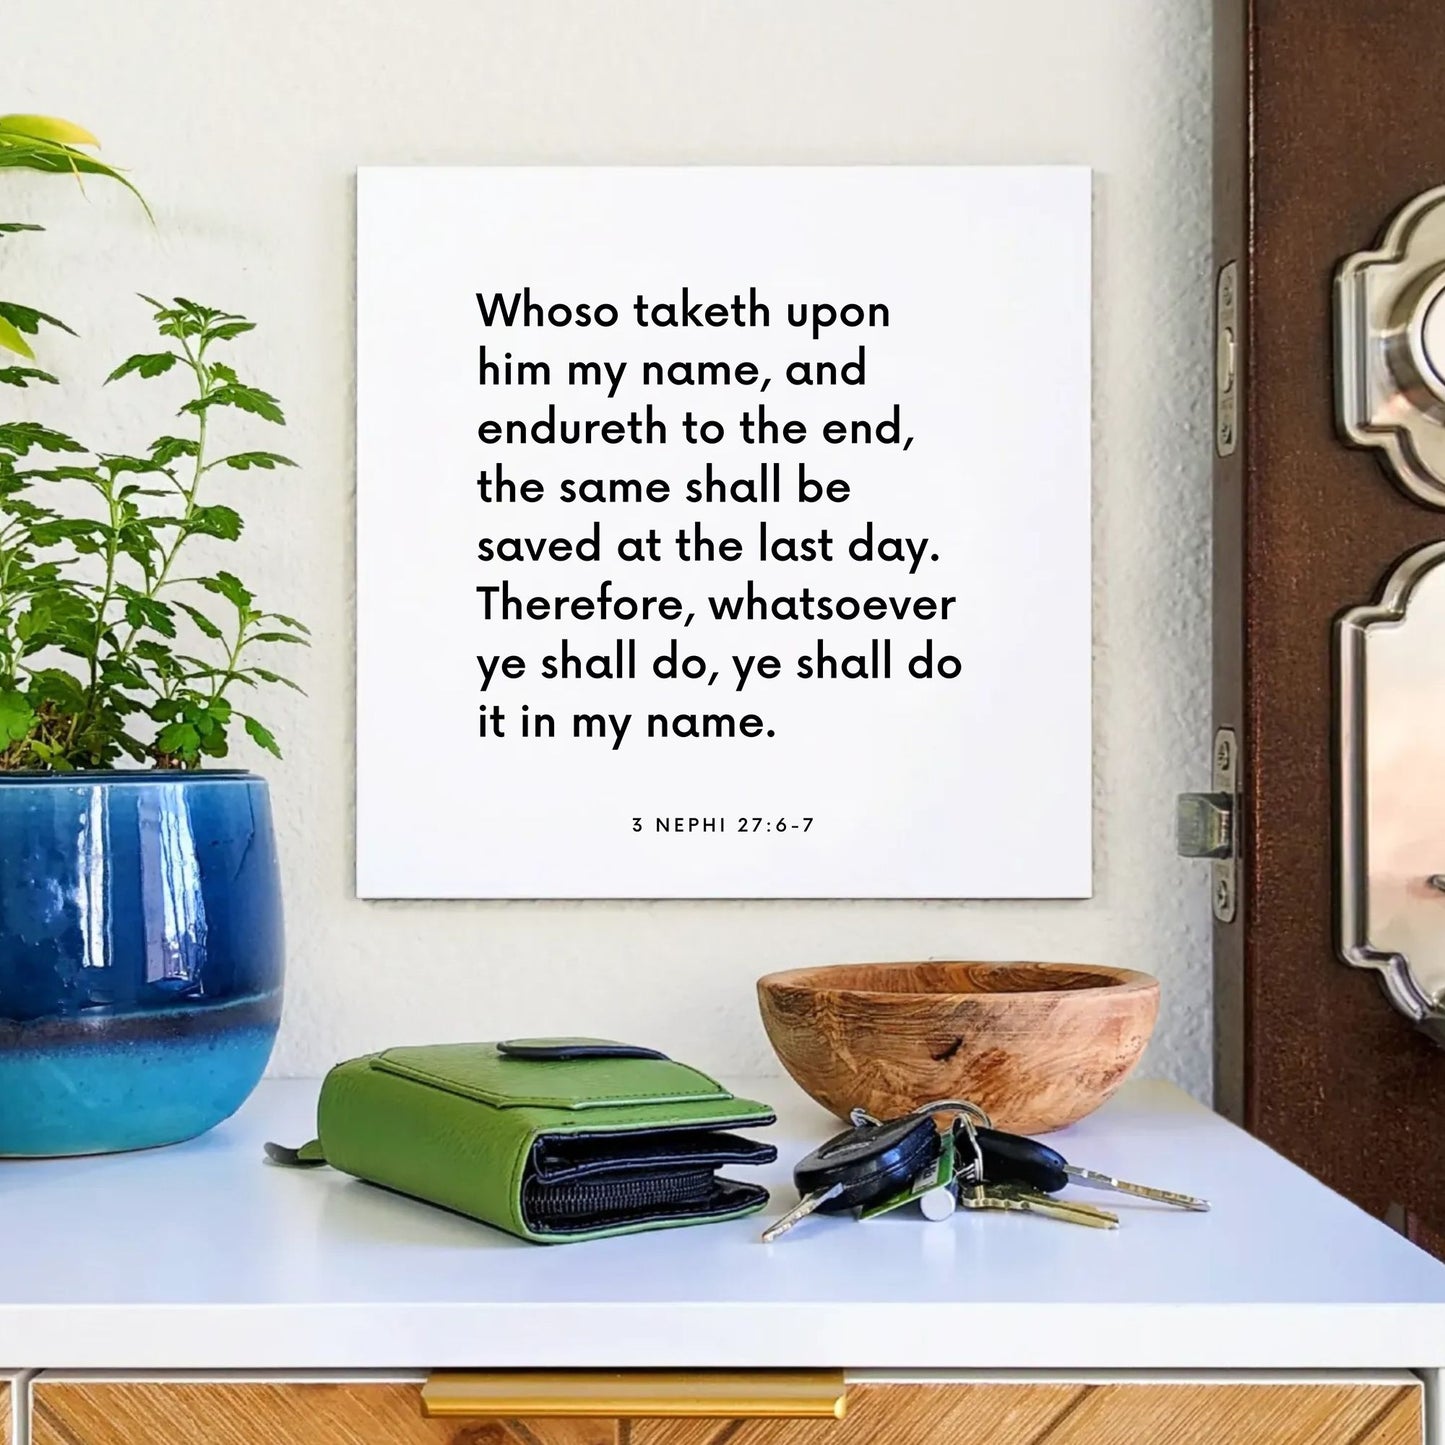 Entryway mouting of the scripture tile for 3 Nephi 27:6-7 - "Whatsoever ye shall do, ye shall do it in my name"